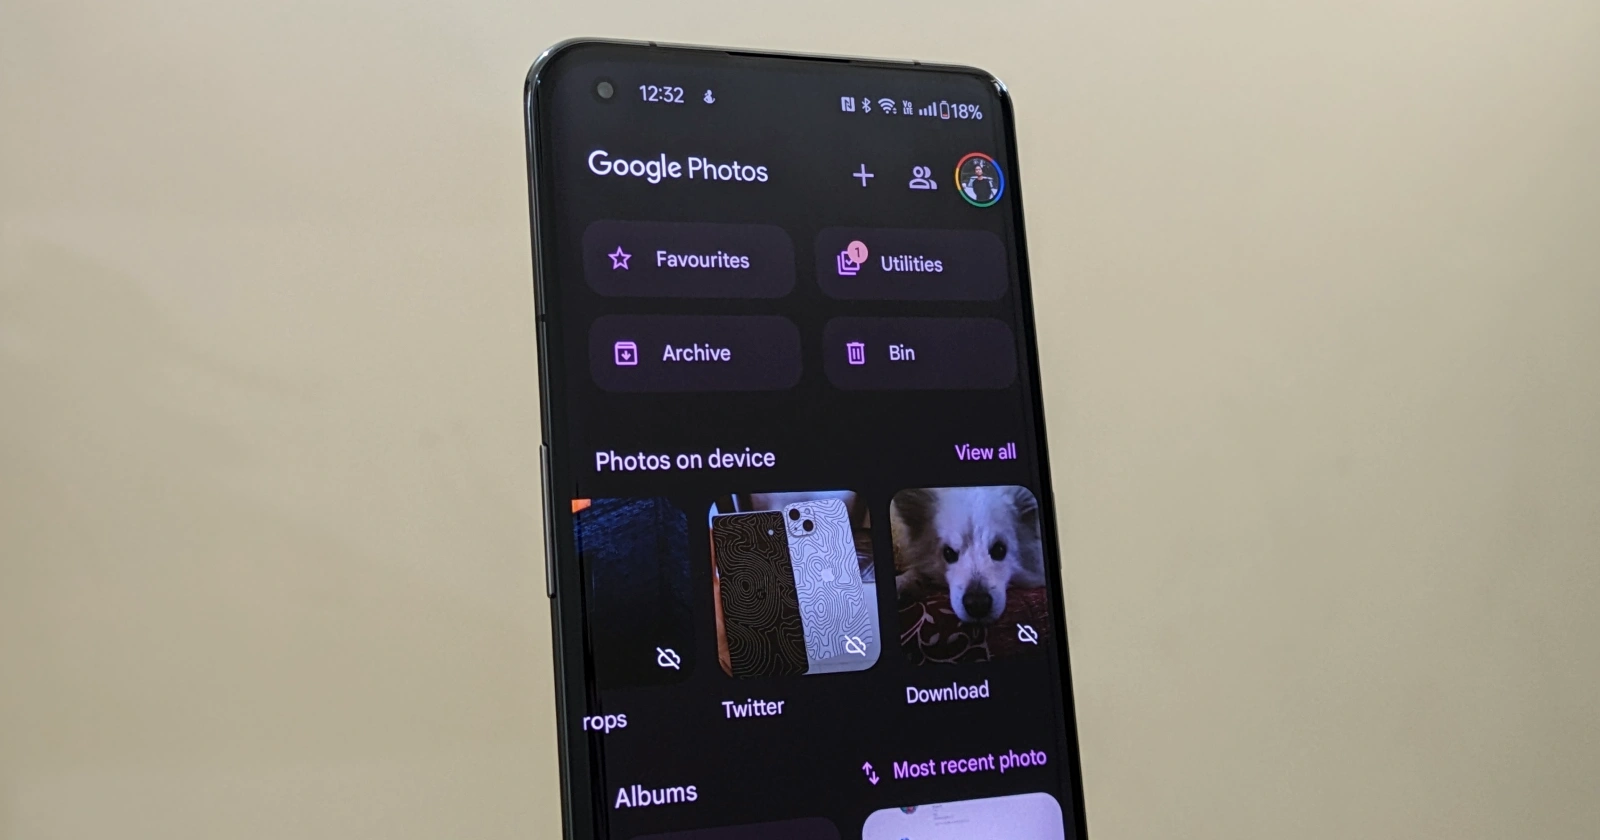 Google Photos to Introduce 'My Week' Feature with Social Media Elements